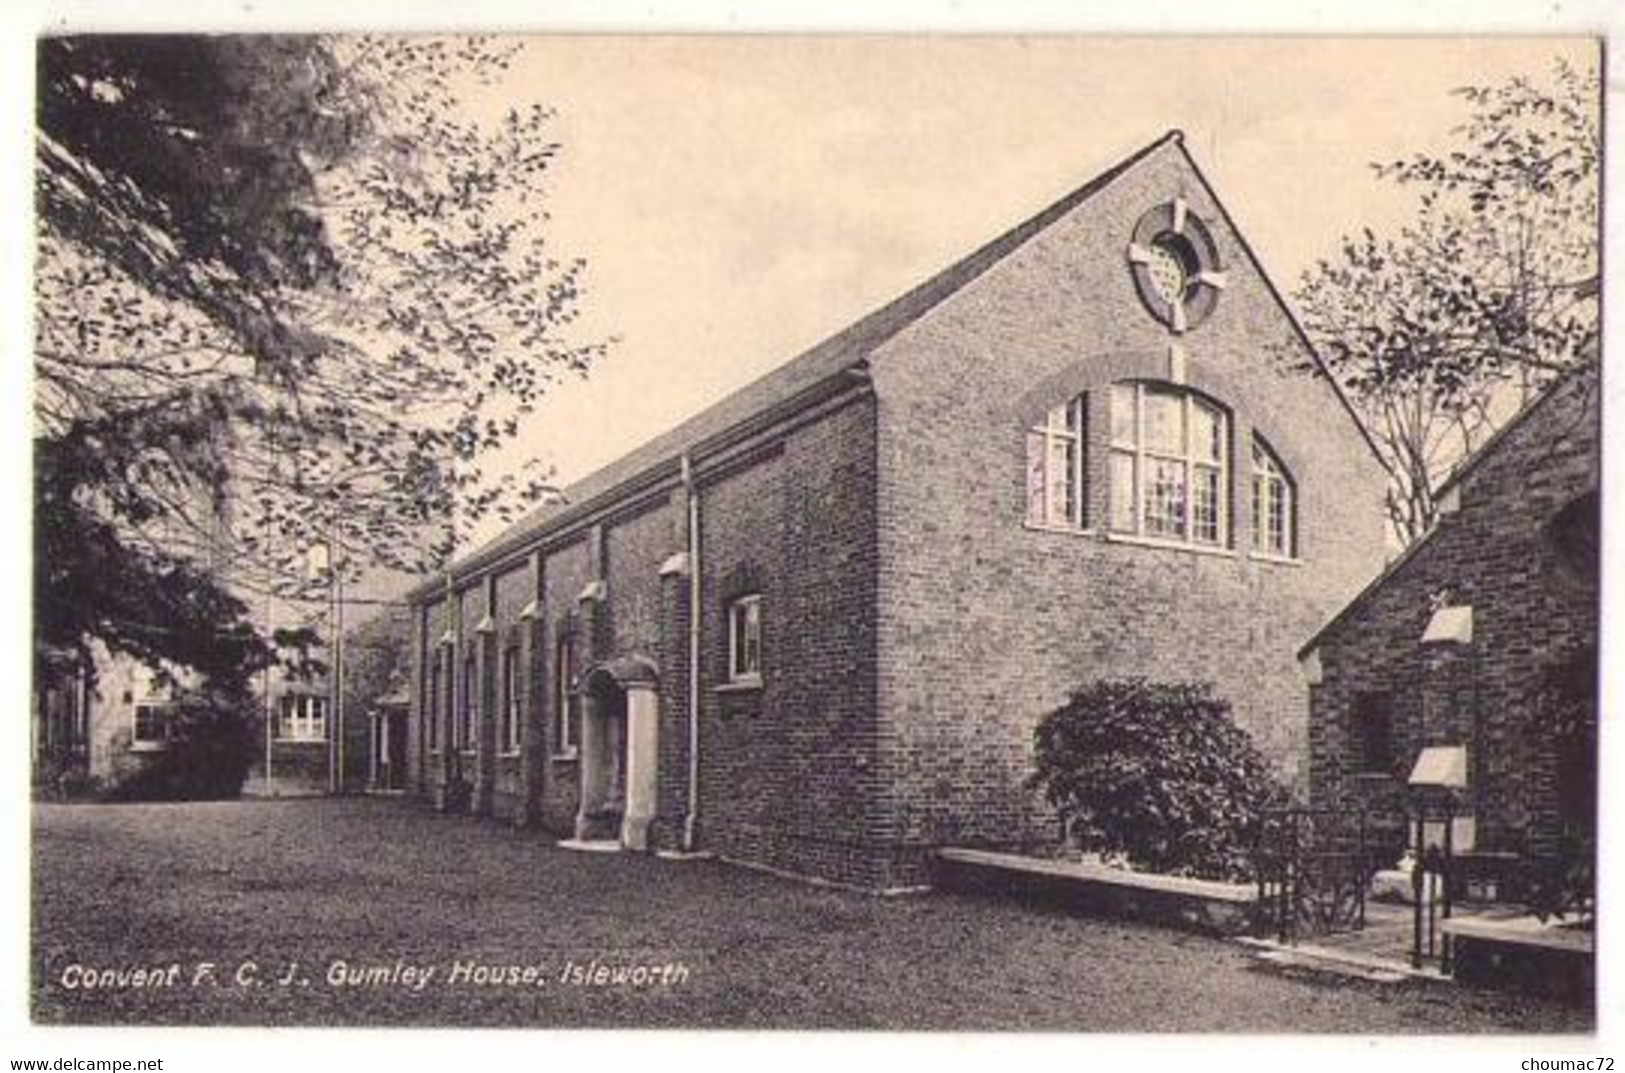 (Royaume-Uni) Angleterre Middlesex 009, Isleworth, Crosbie & Co, Convent FCJ, Gumley House - Middlesex